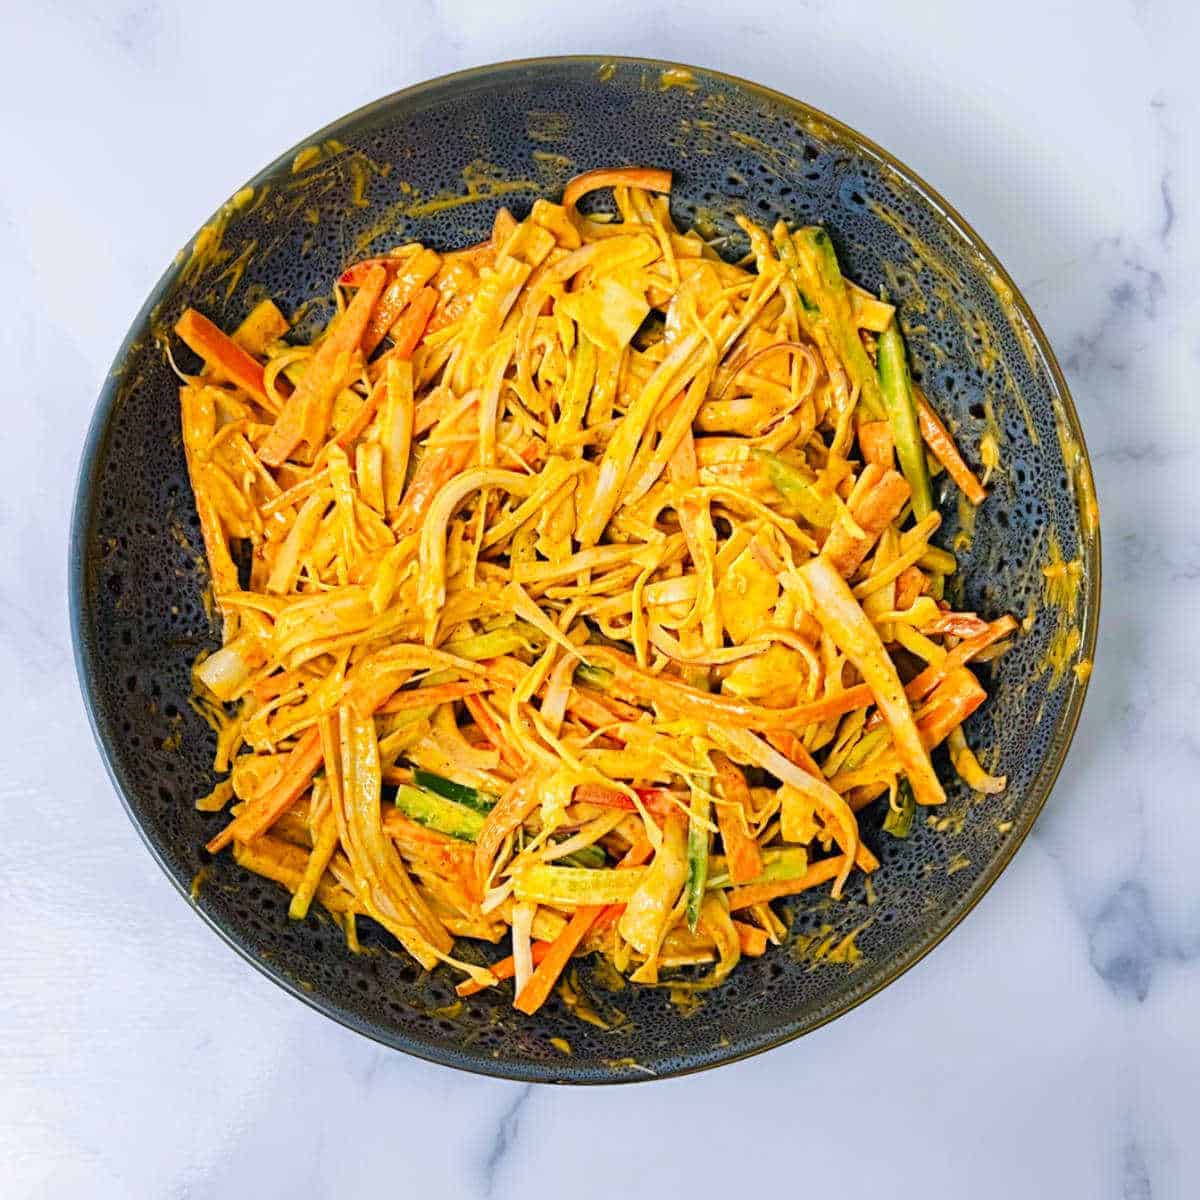 Shredded carrots in a bowl on a marble counter, perfect for your imitation crab recipes.